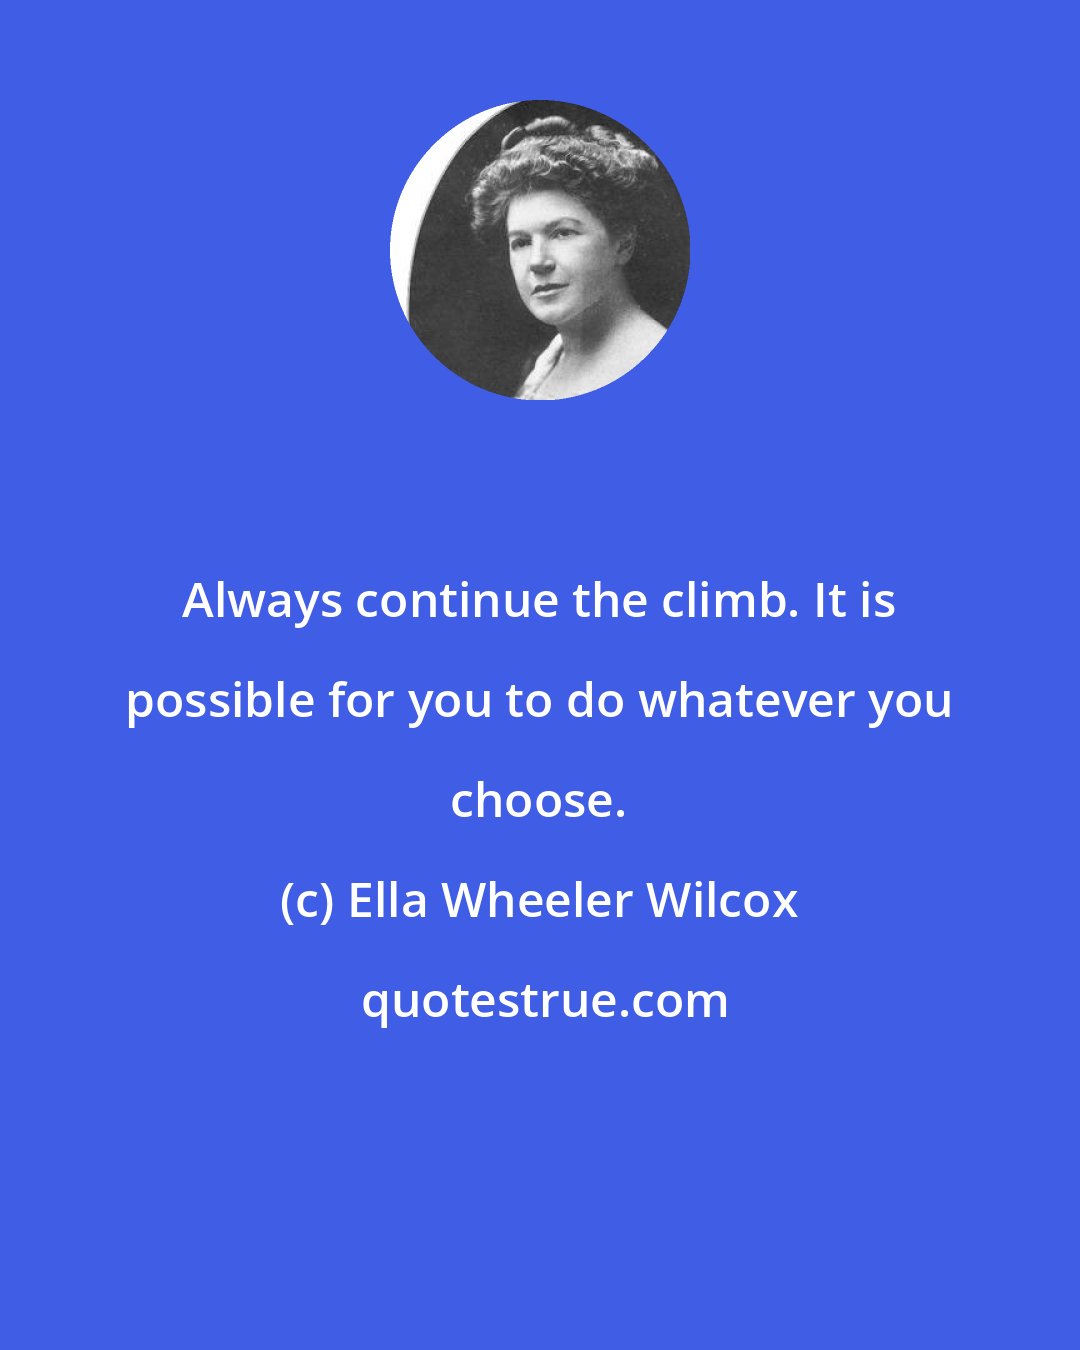 Ella Wheeler Wilcox: Always continue the climb. It is possible for you to do whatever you choose.